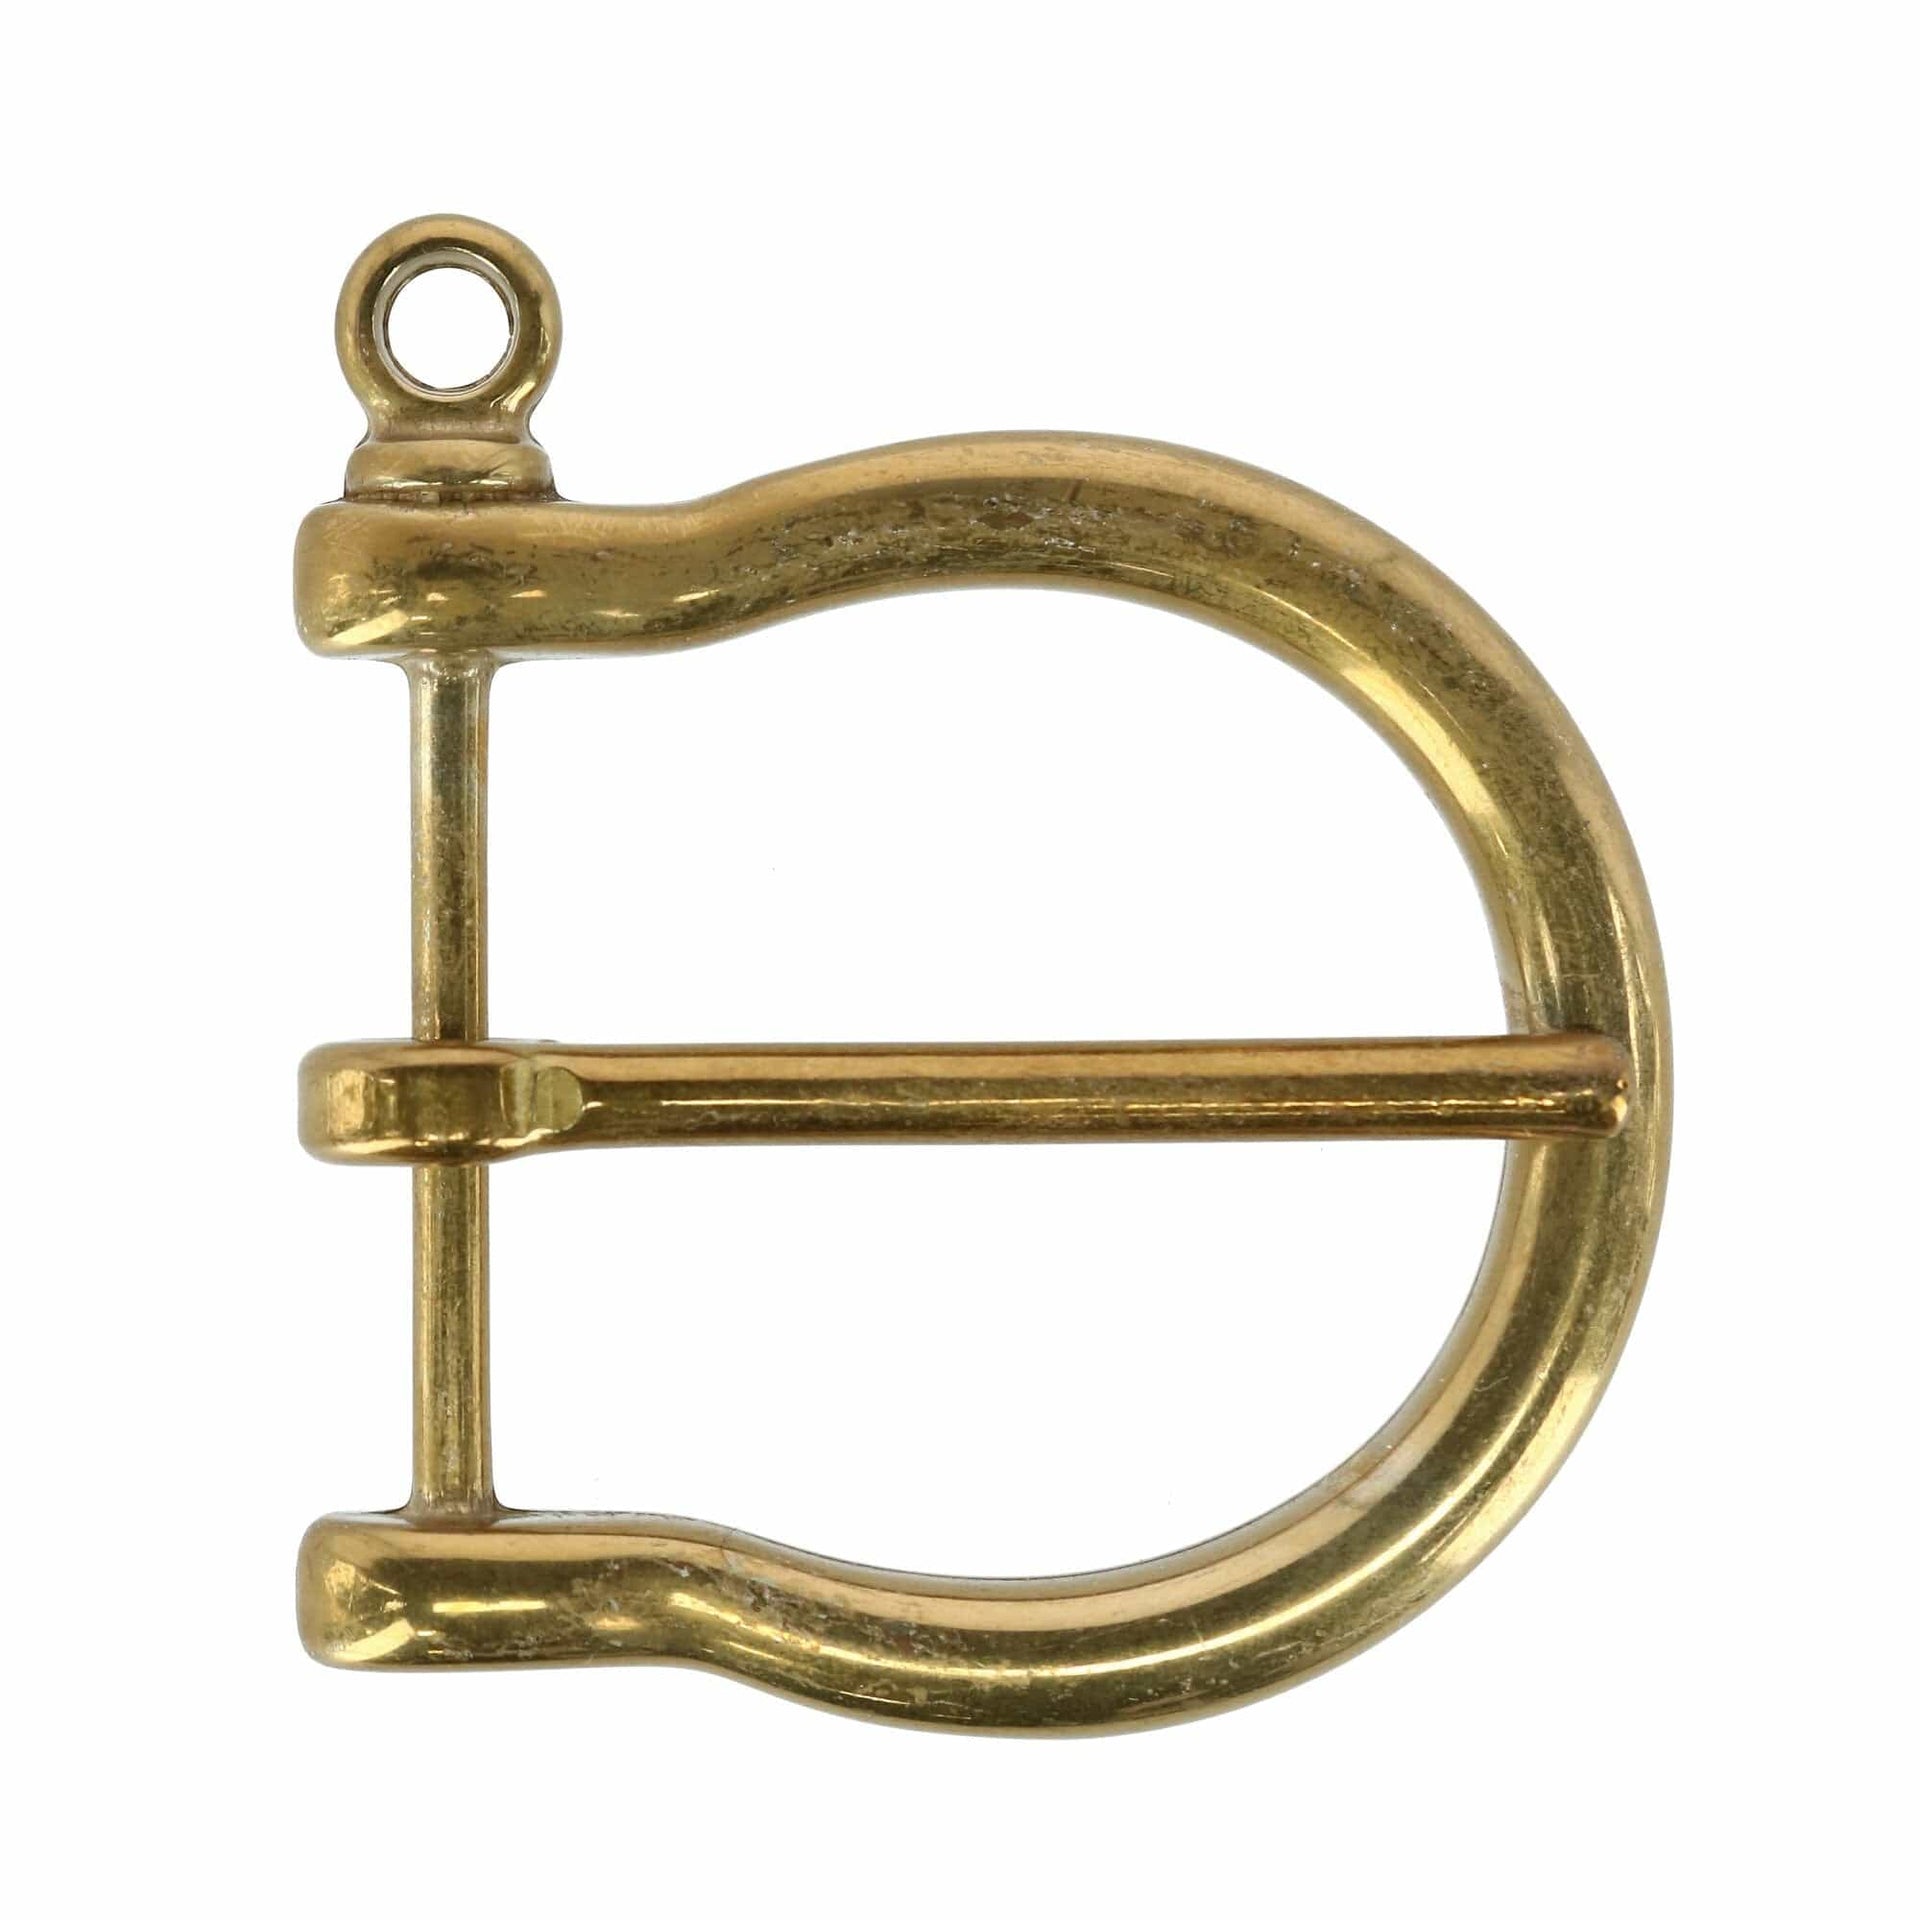 35mm Distinguished Rounded Solid Brass Harness Belt Buckle by